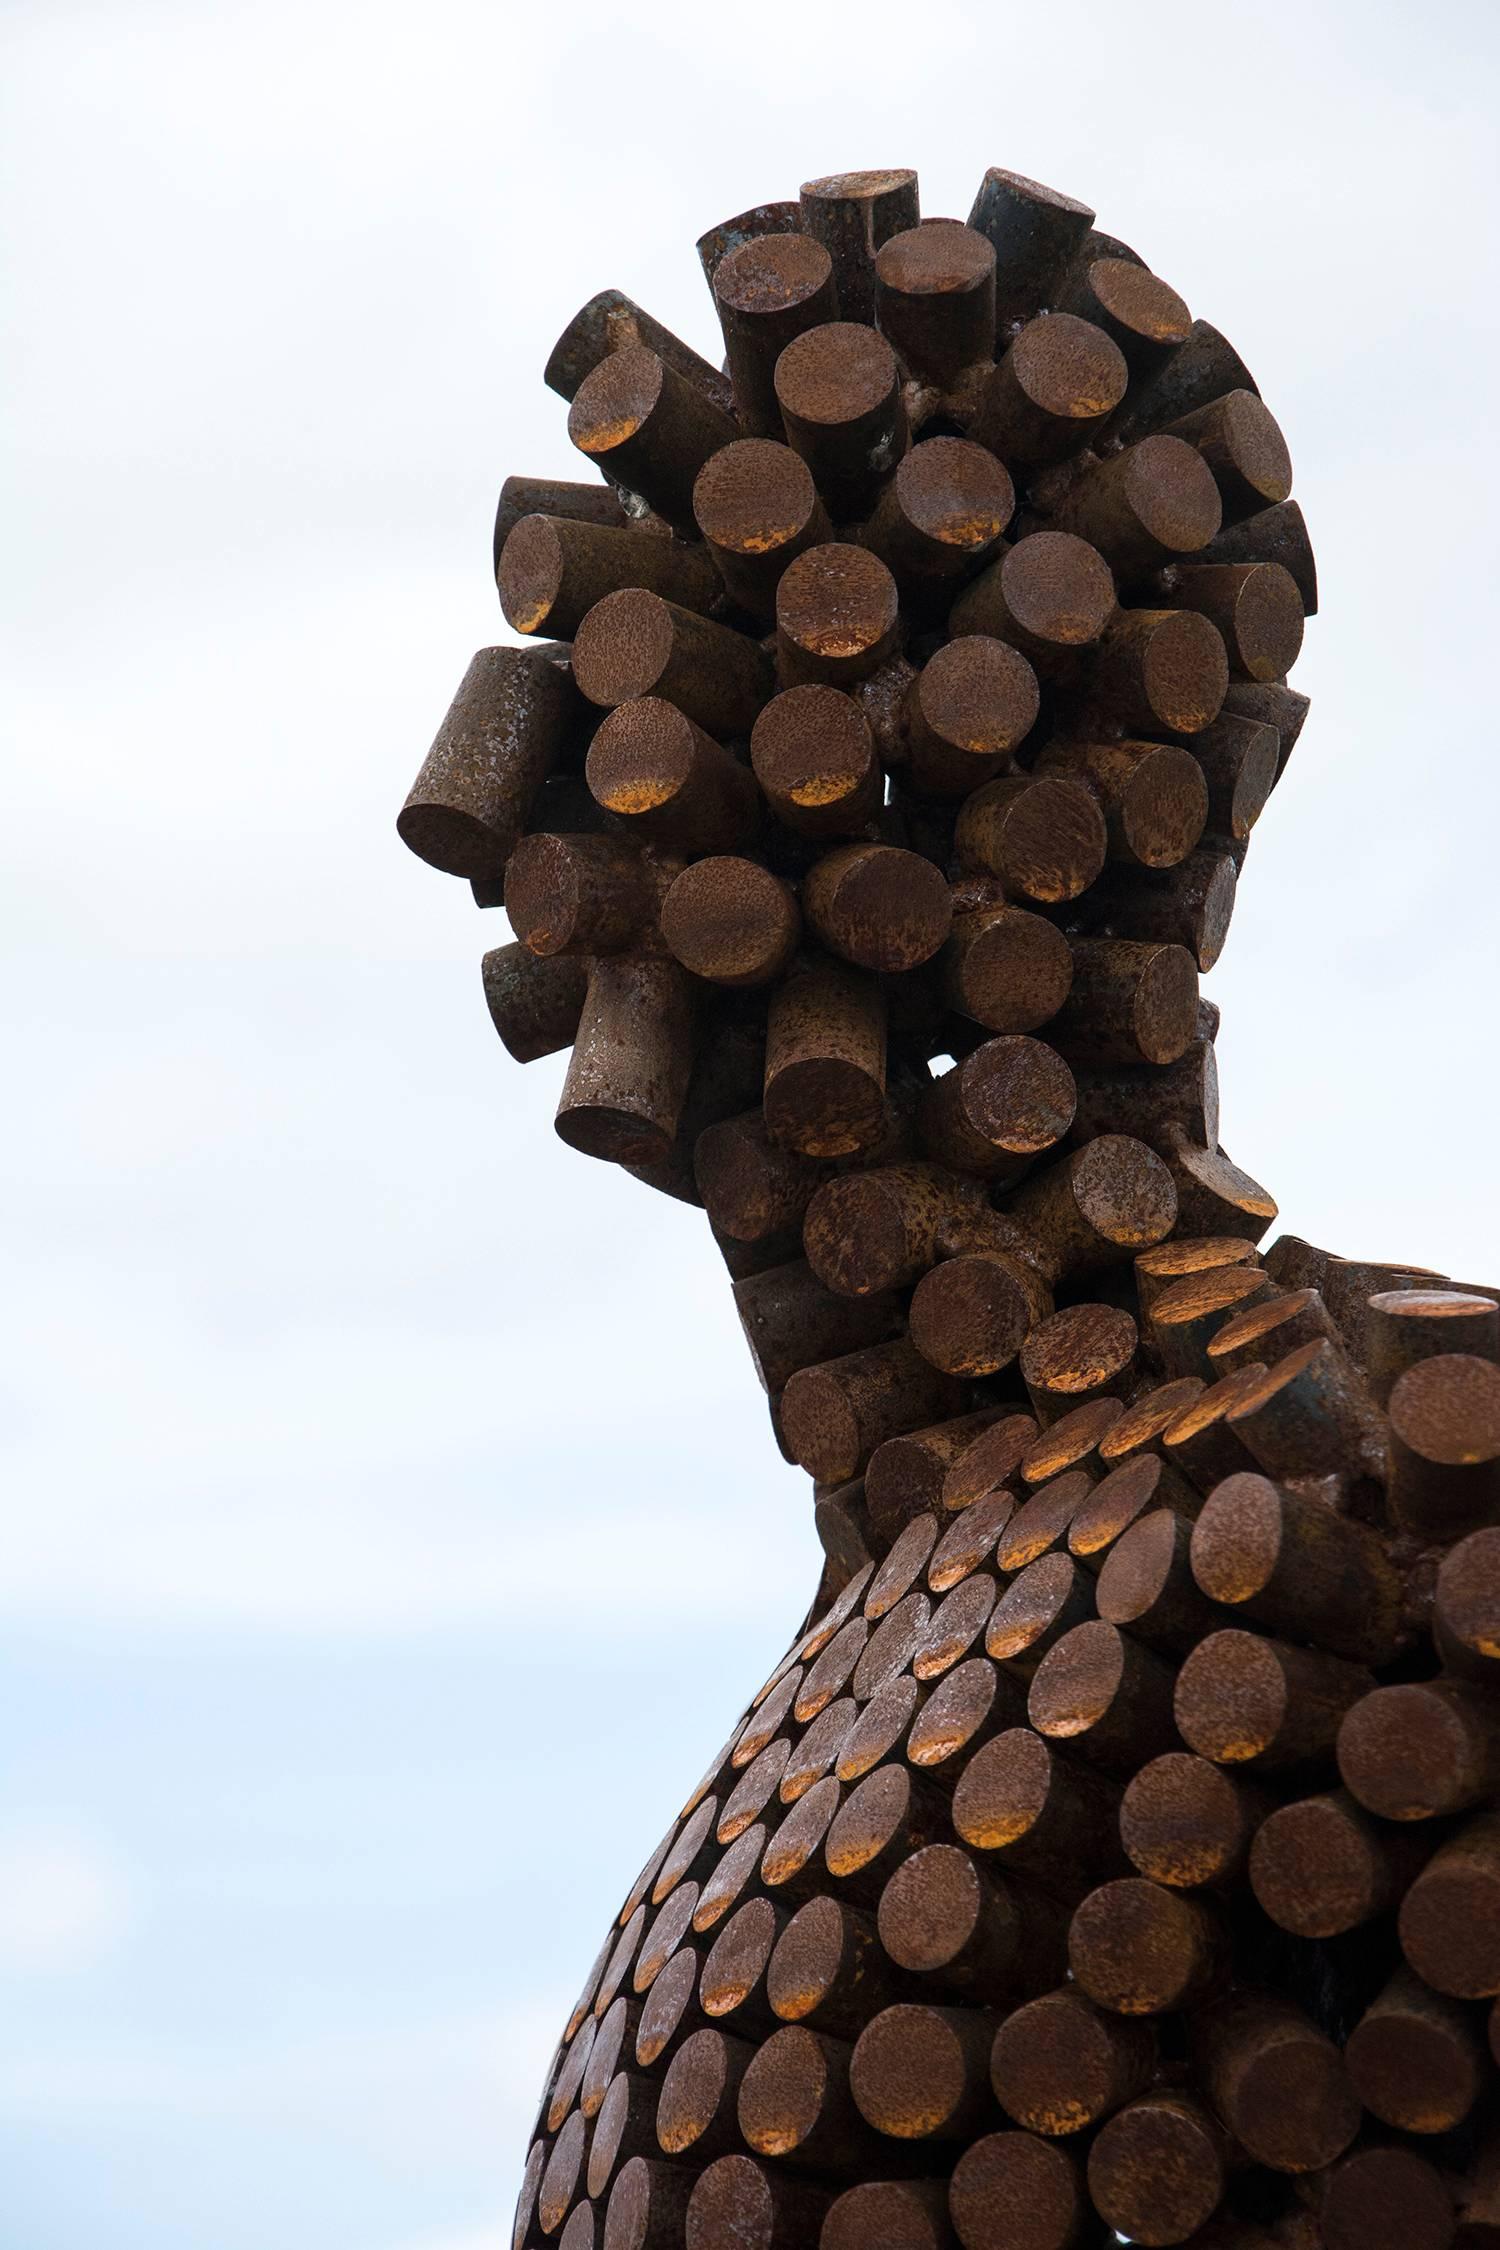 A seated figure reclines atop a steel cube in this outdoor sculpture by Mississippi artist Jason Kimes. Made of welded coin-sized discs of steel, the figure's shell is slightly transparent. The work that has taken on a weathered, rusted patina